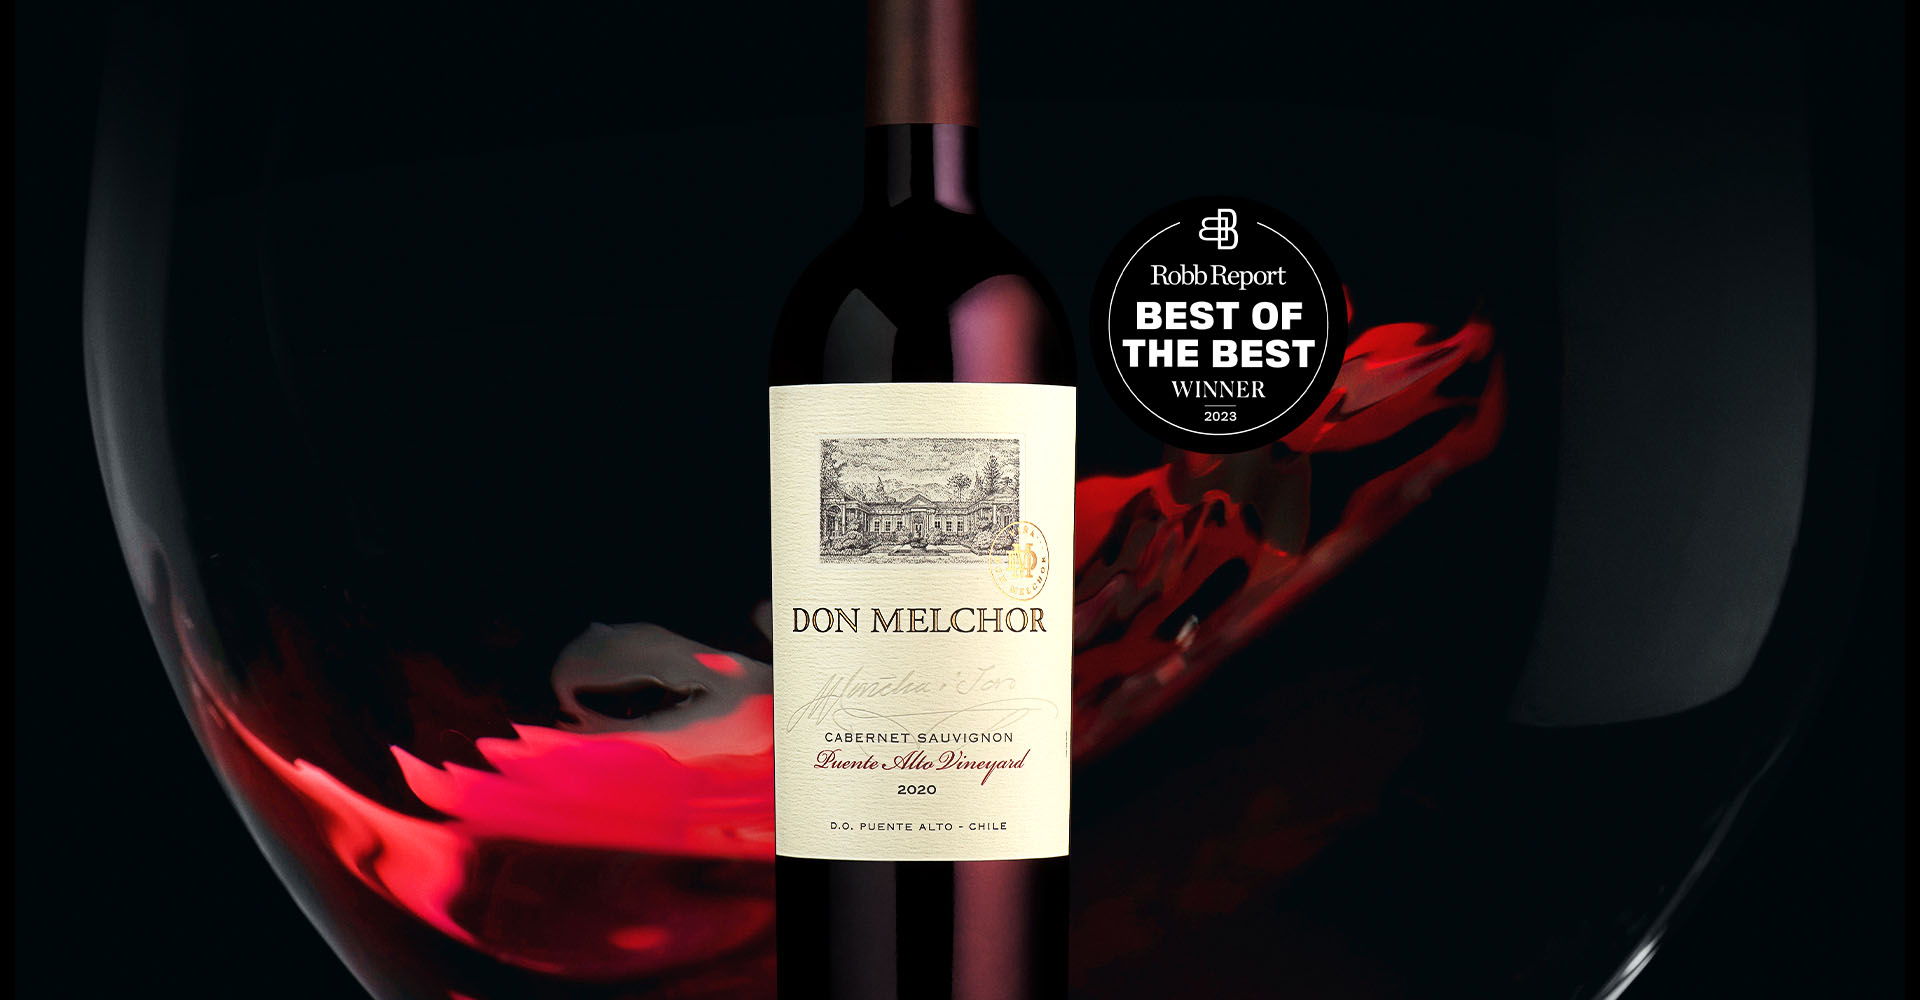 Don Melchor 2020 the only Chilean wine in Robb Report’s “Best of the Best Wines of the World”